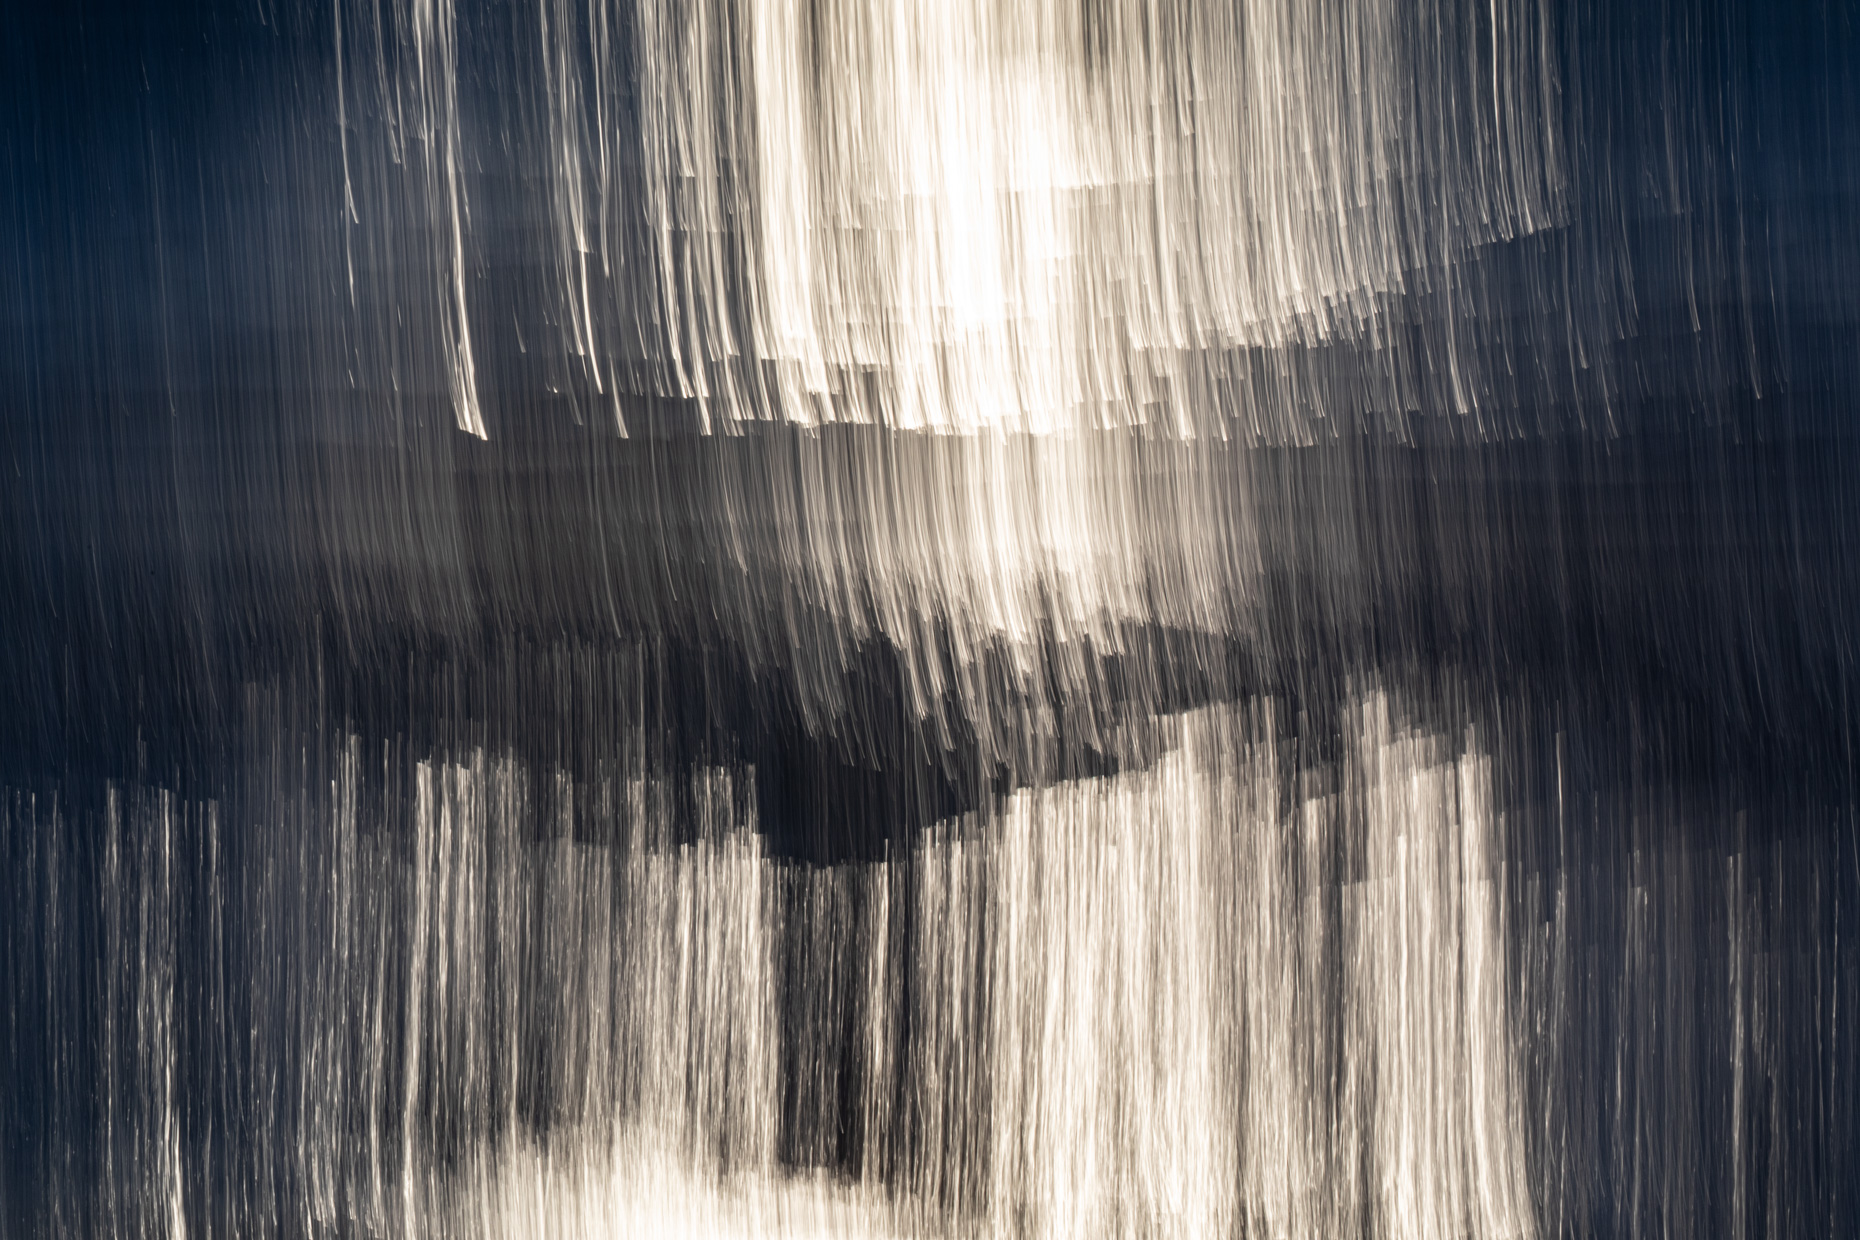 climate_change_winter_ice_Saint_Lawrence_River_Quebec_ICM_intentional_camera_movement-14